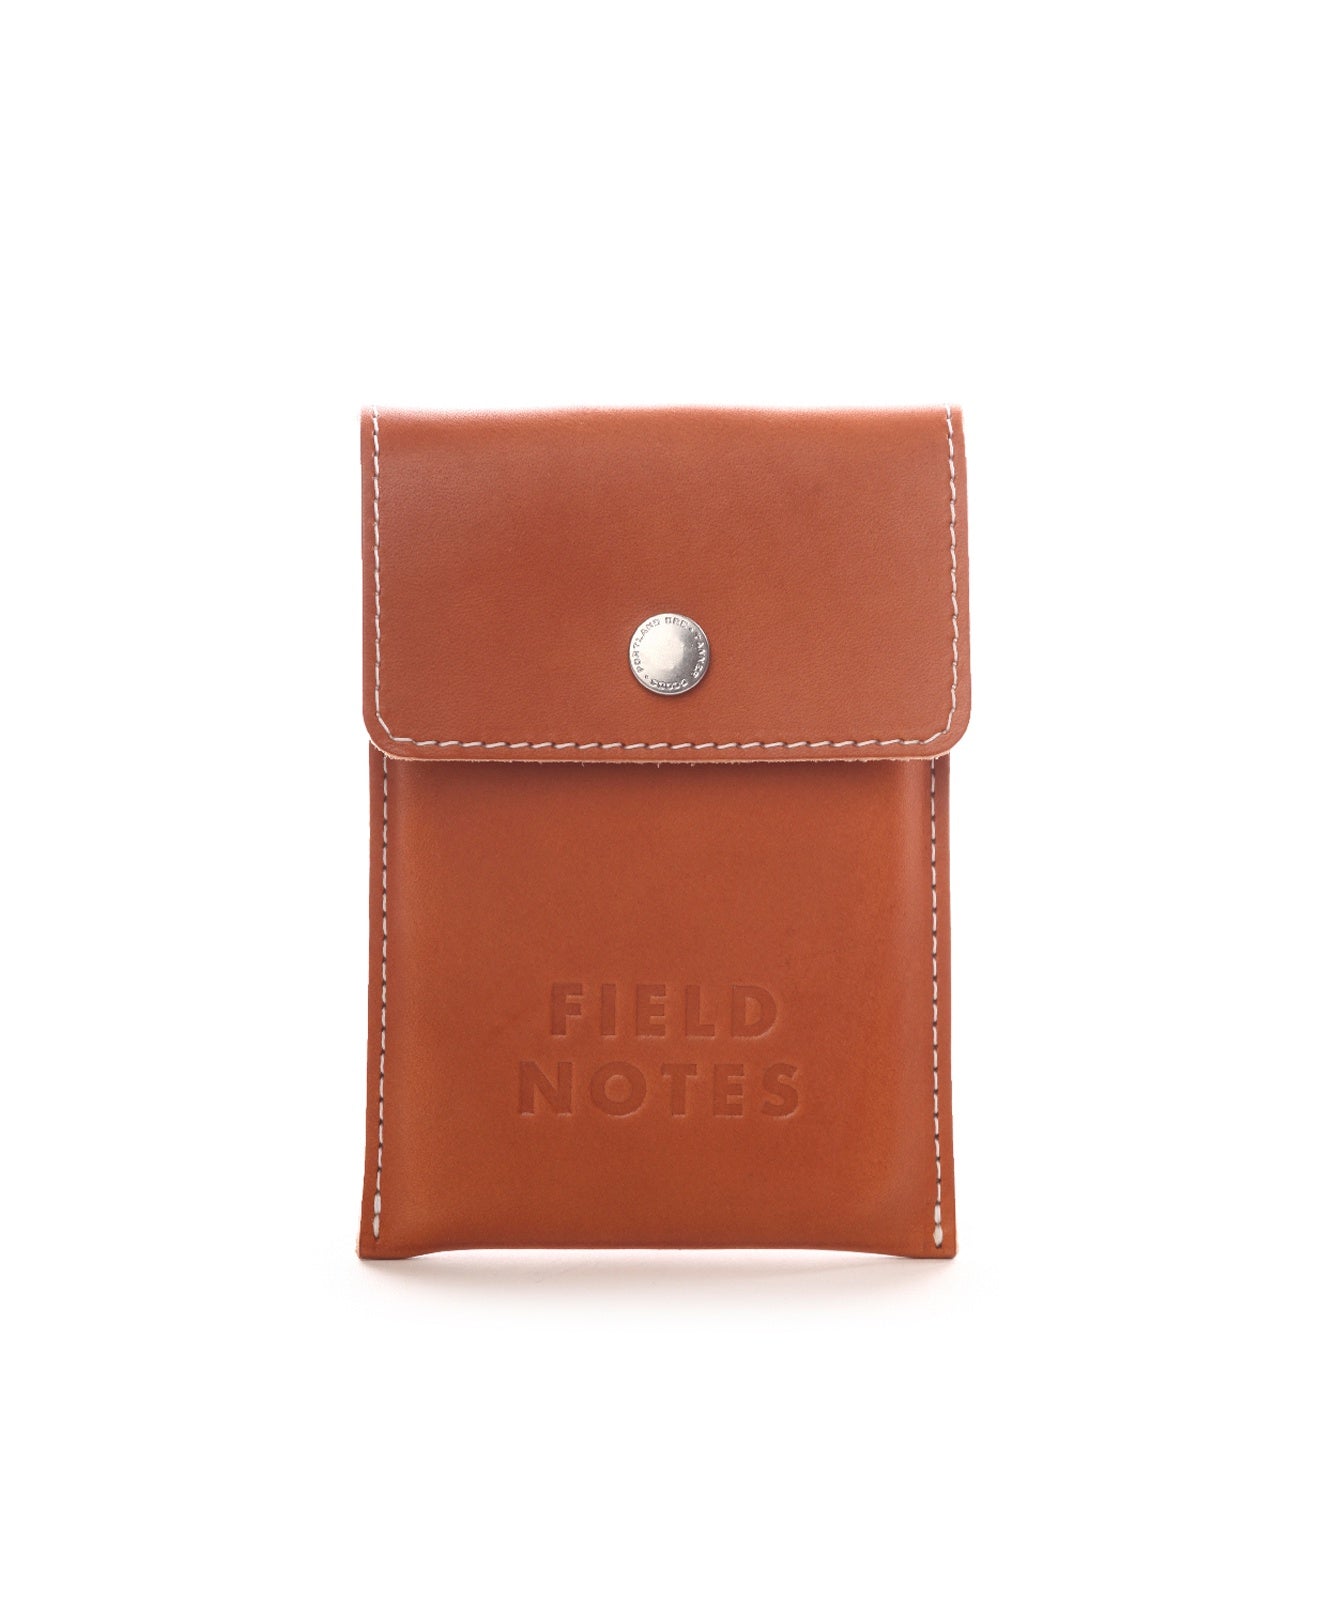 Field Notes - Pony Express Leather Pouch